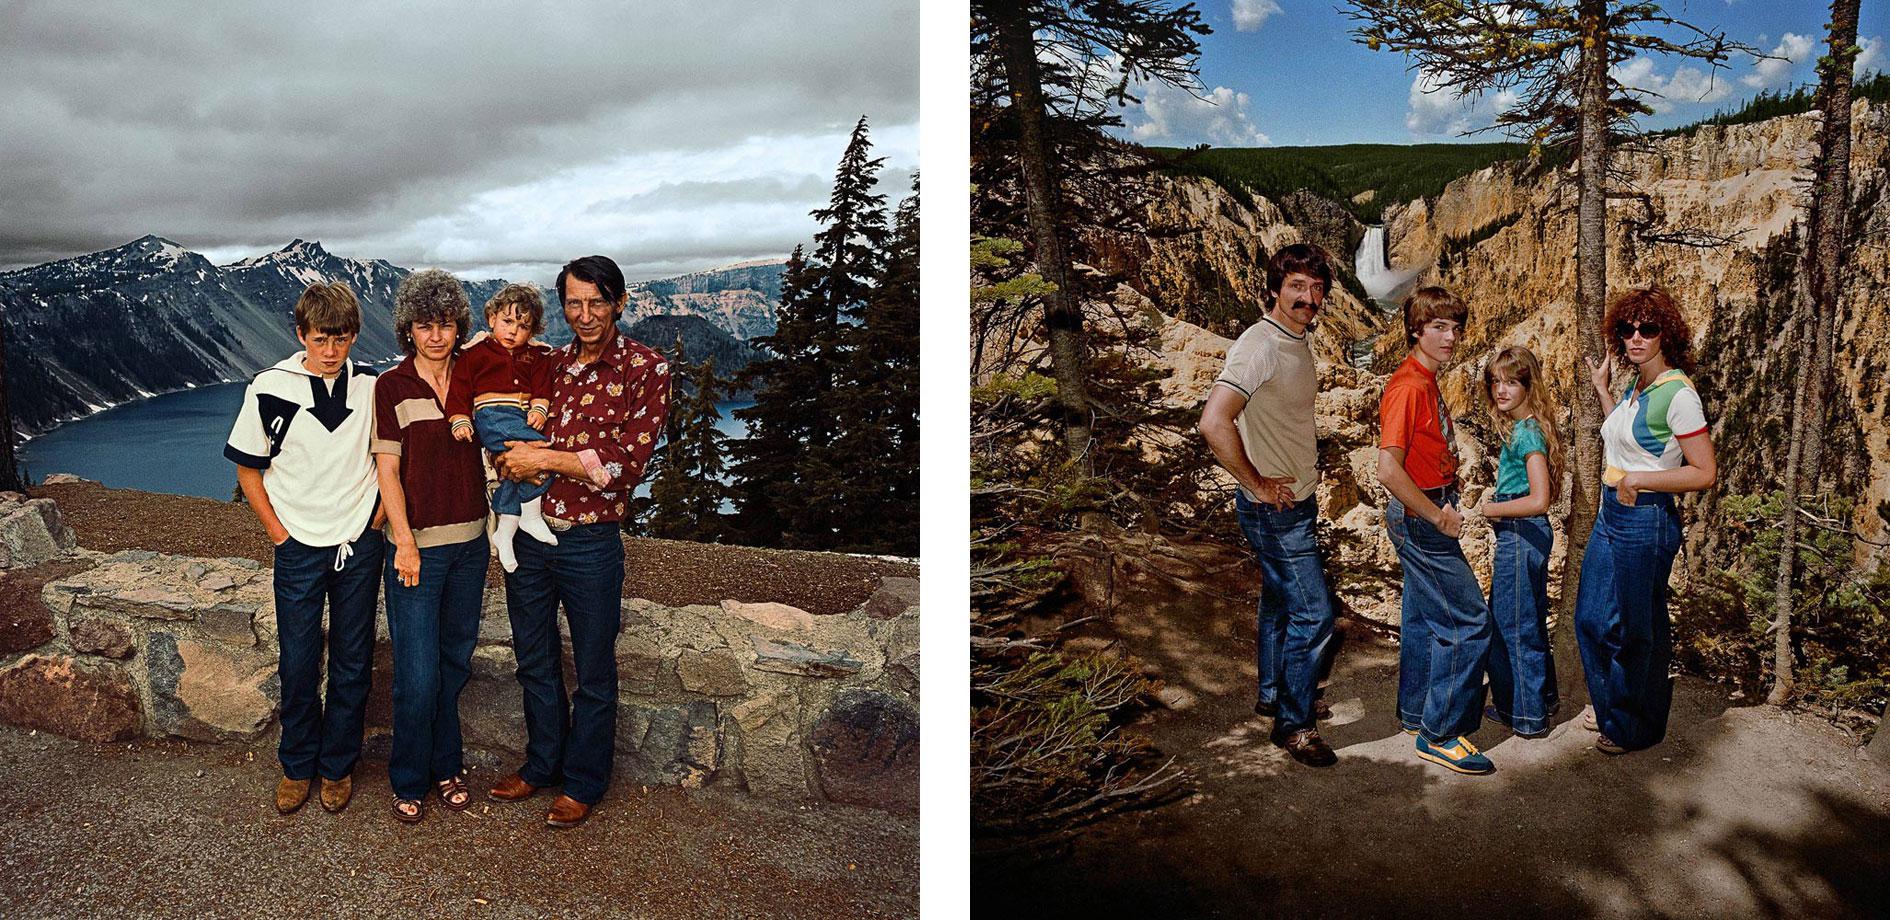 Family at Crater Lake National Park, OR. 1980 Family at Lower Falls Overlook, Yellowstone national Park, WY. 1980 (r)